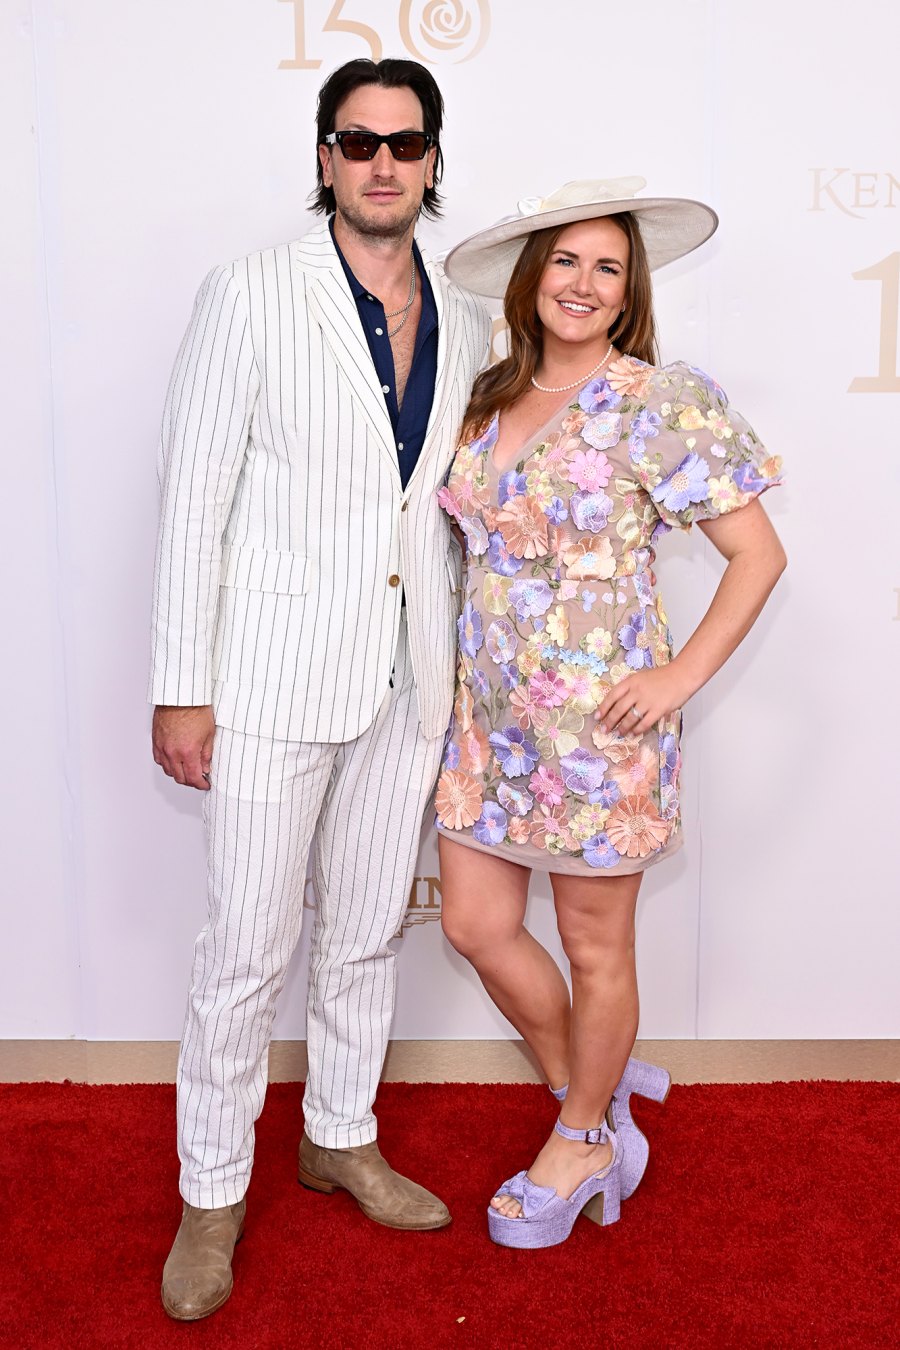 Celebs Dress to Impress at the Kentucky Derby